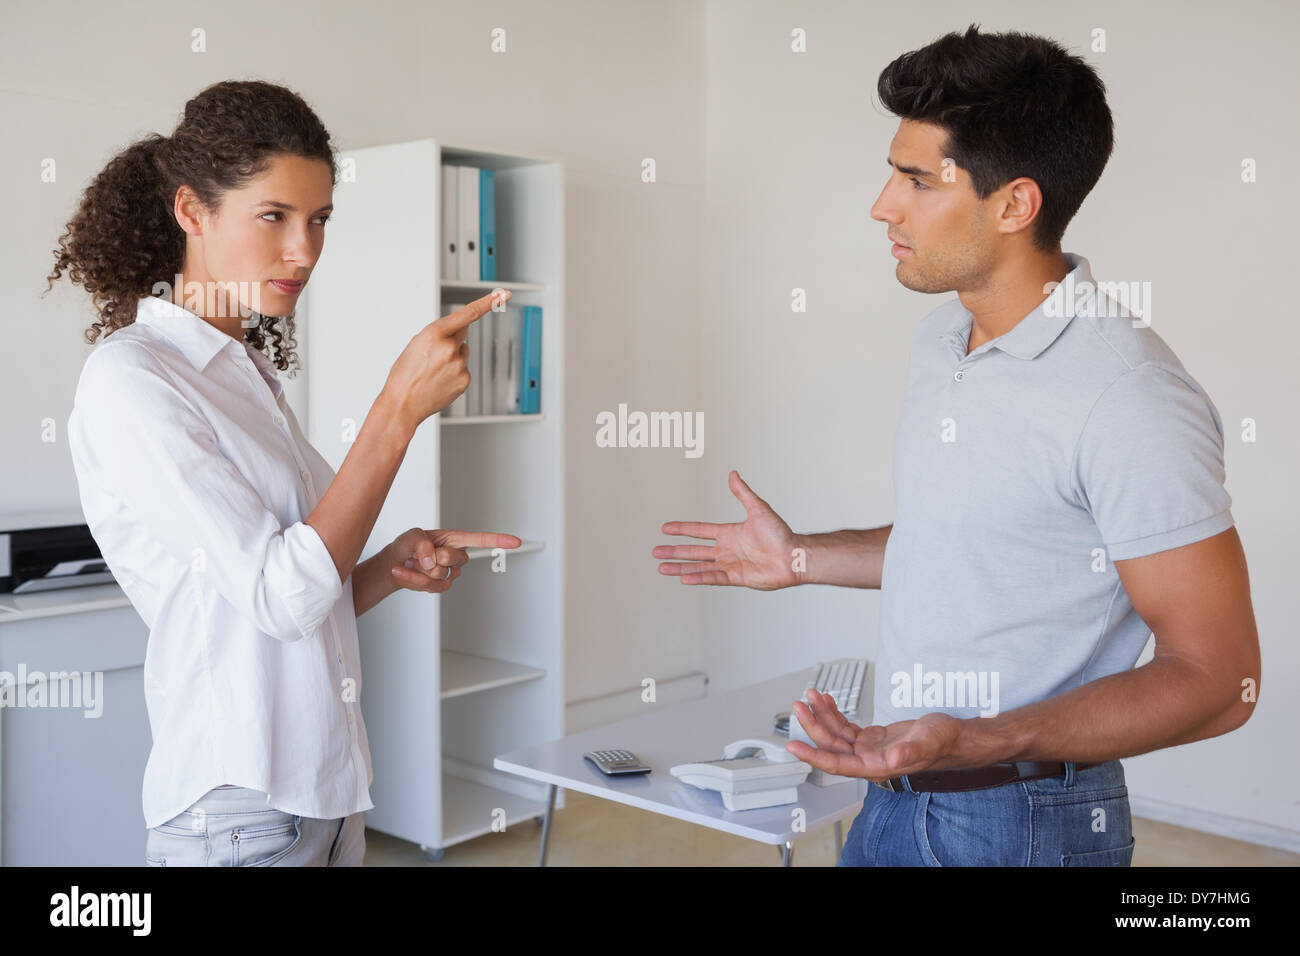 Casual business partners having an argument Stock Photo